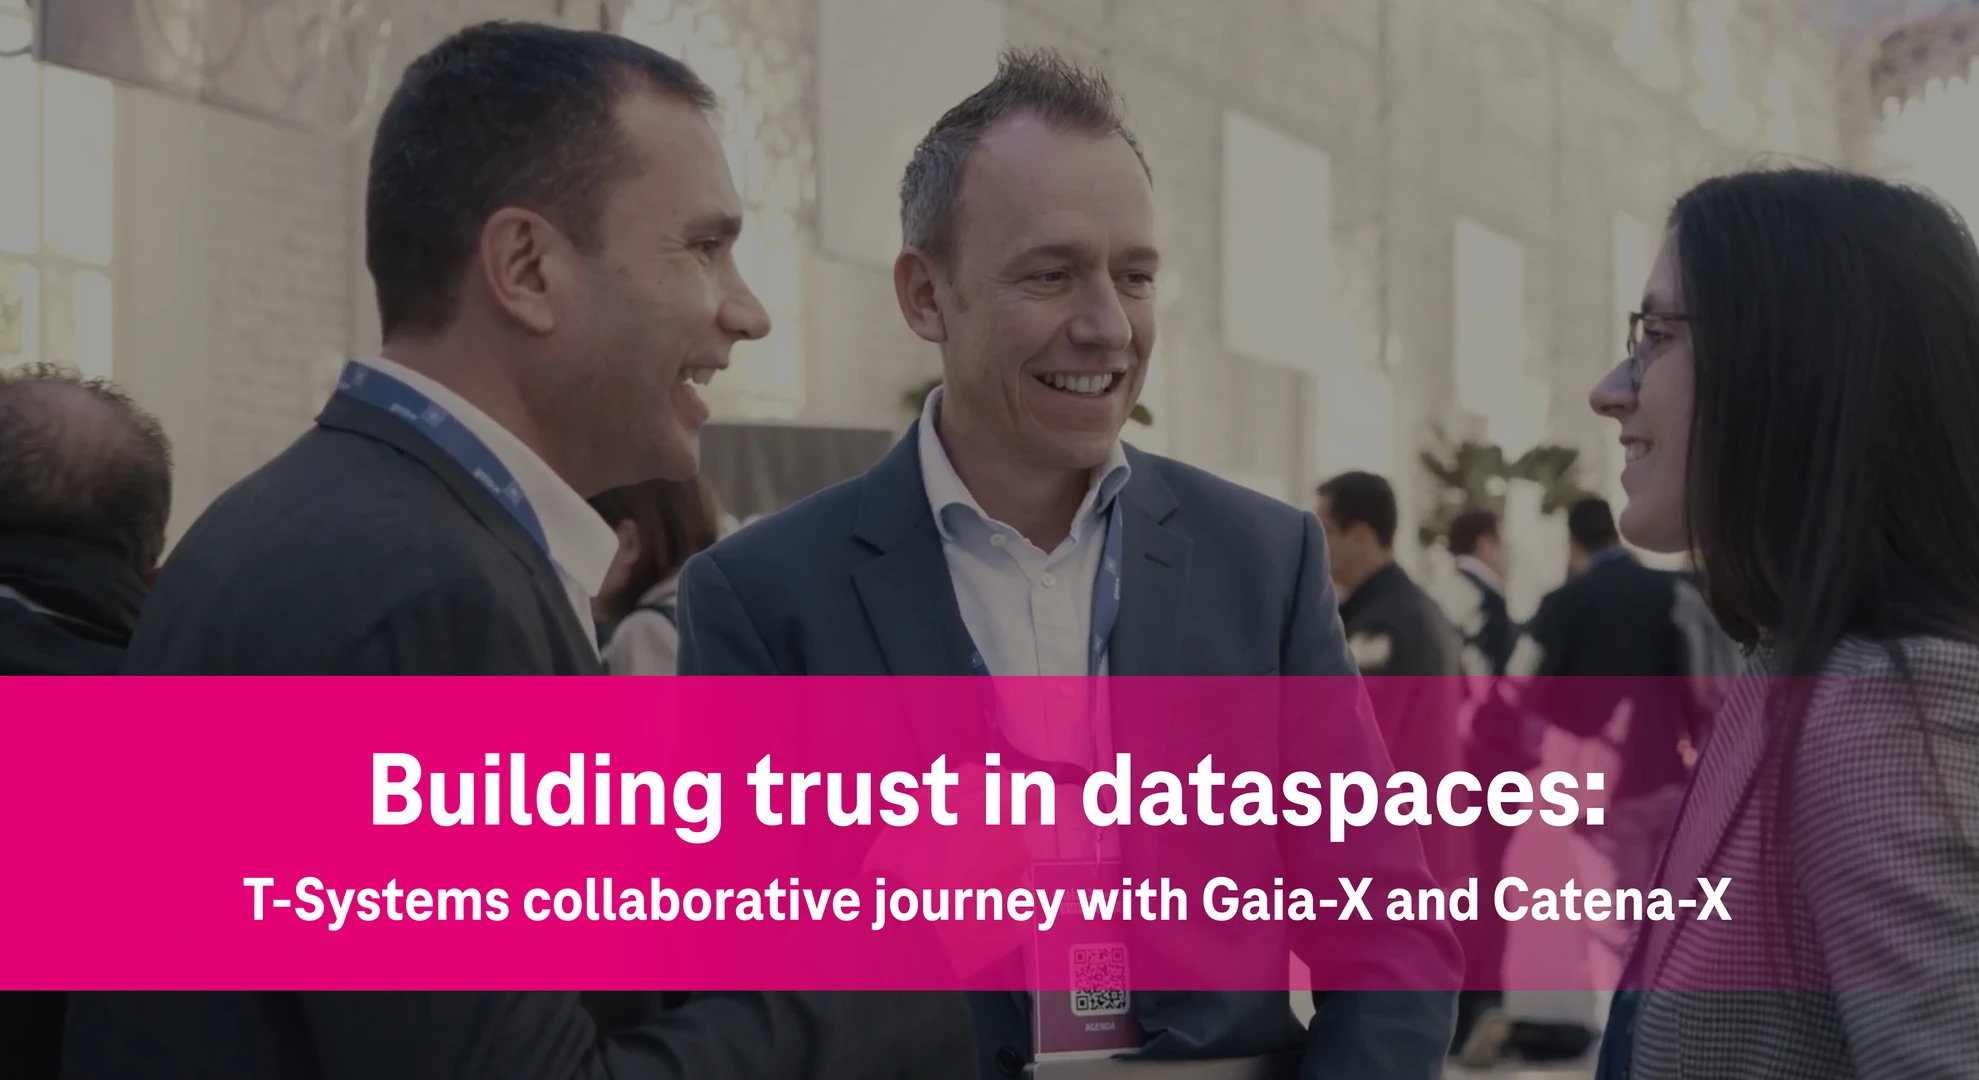 Building trust in dataspaces: T-Systems collaborative journey with Gaia-X and Catena-X